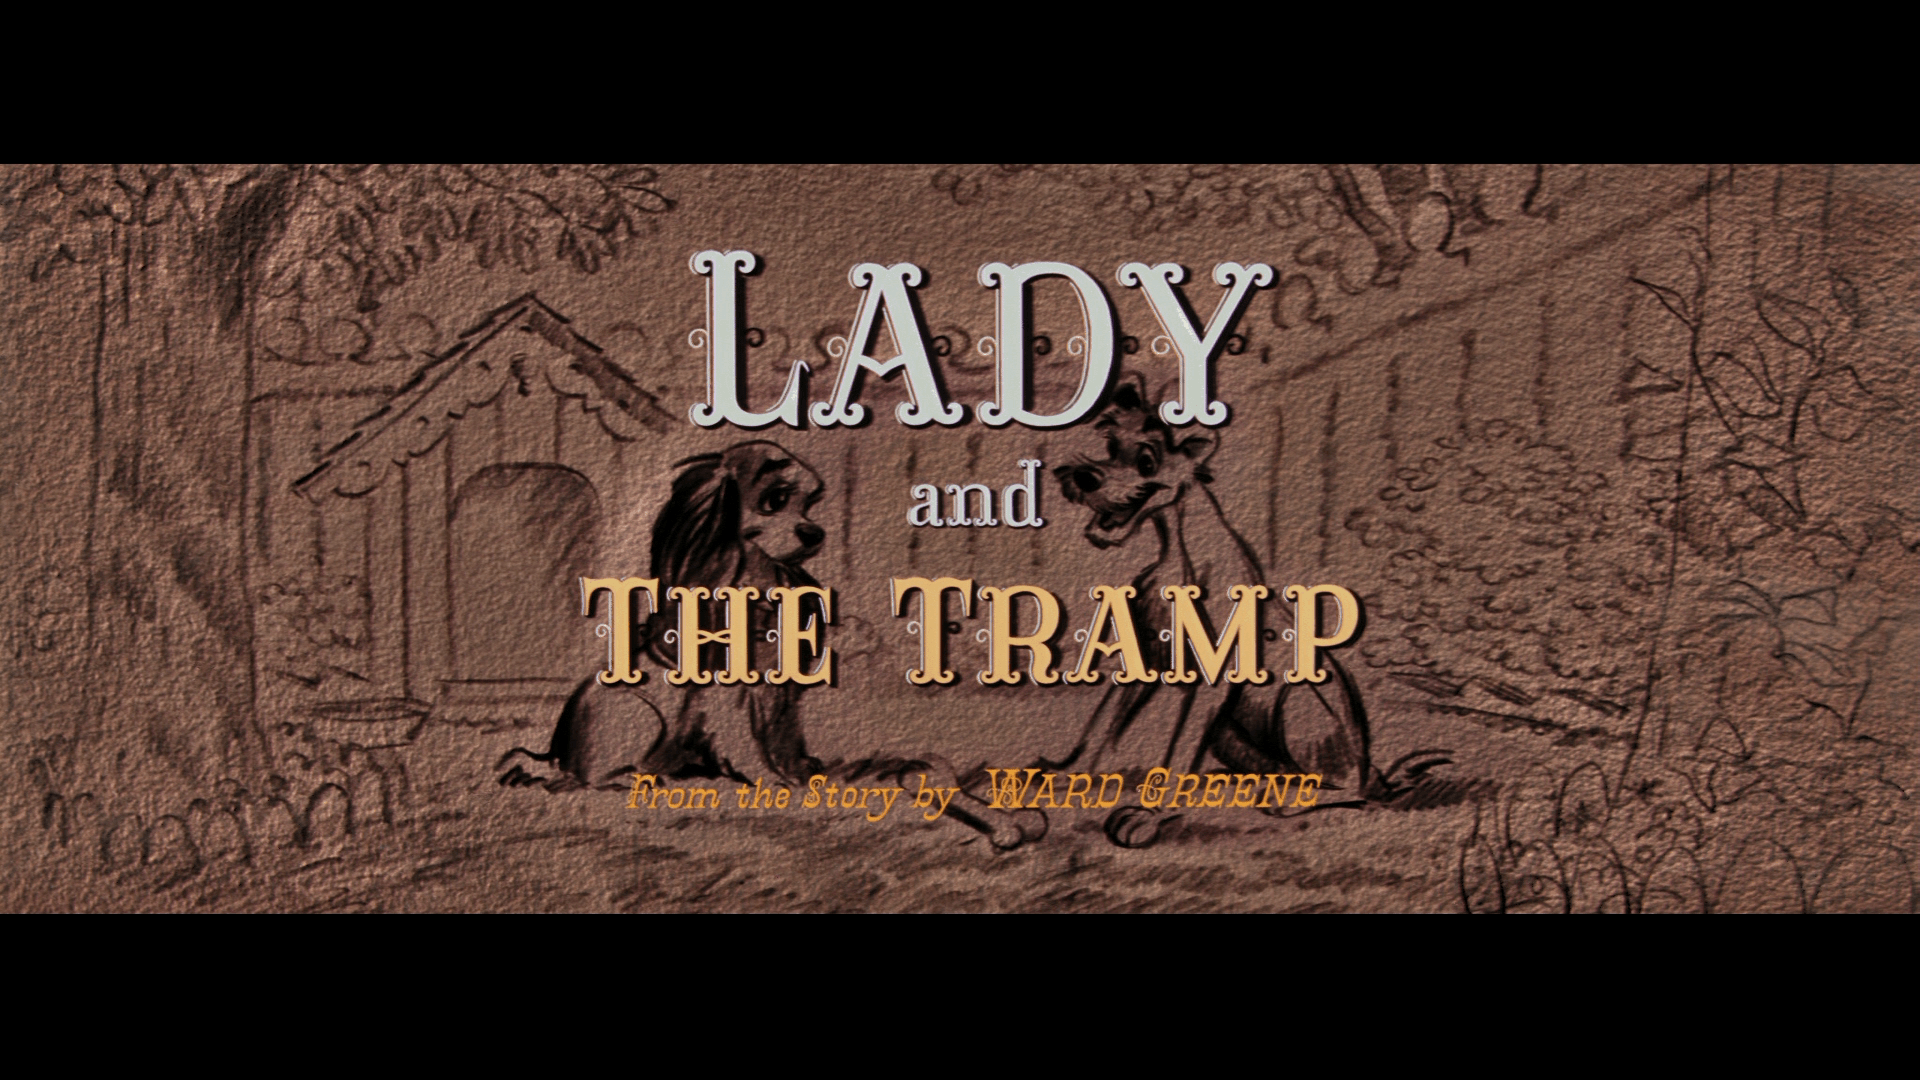 Lady and the Tramp Logo - Lady and the Tramp (1955 film)